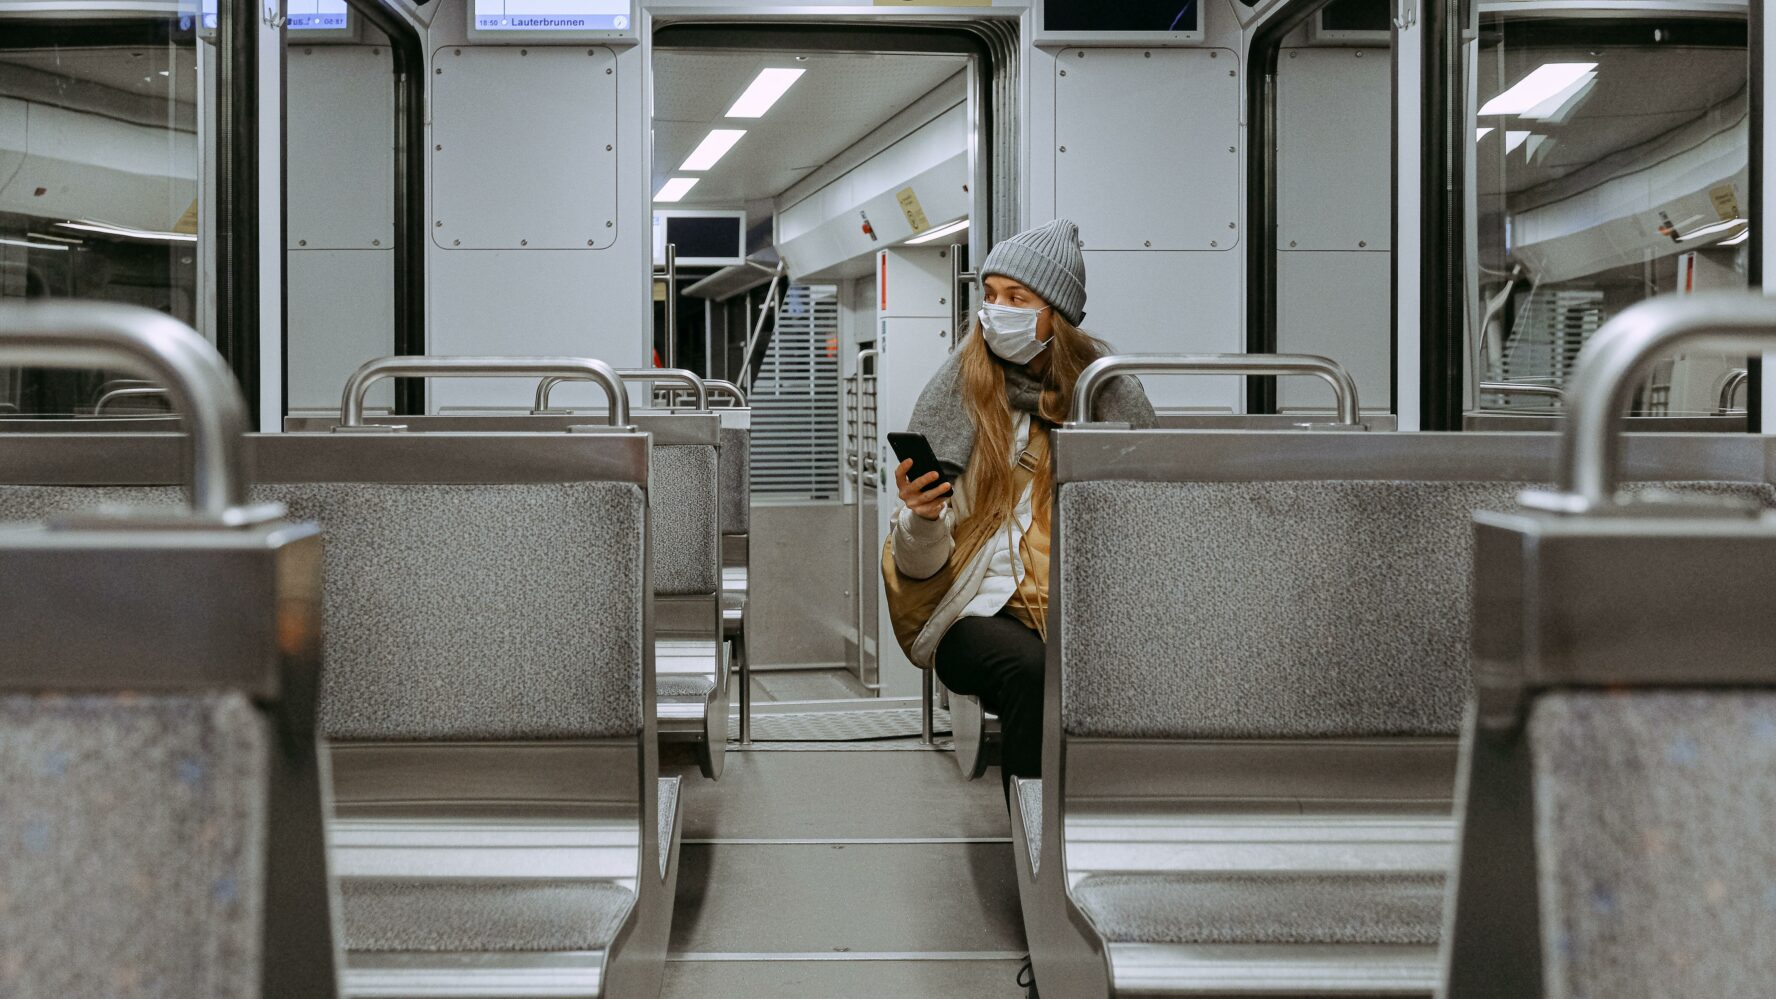 A woman riding the subway wearing a mask during the COVID-19 pandemic.